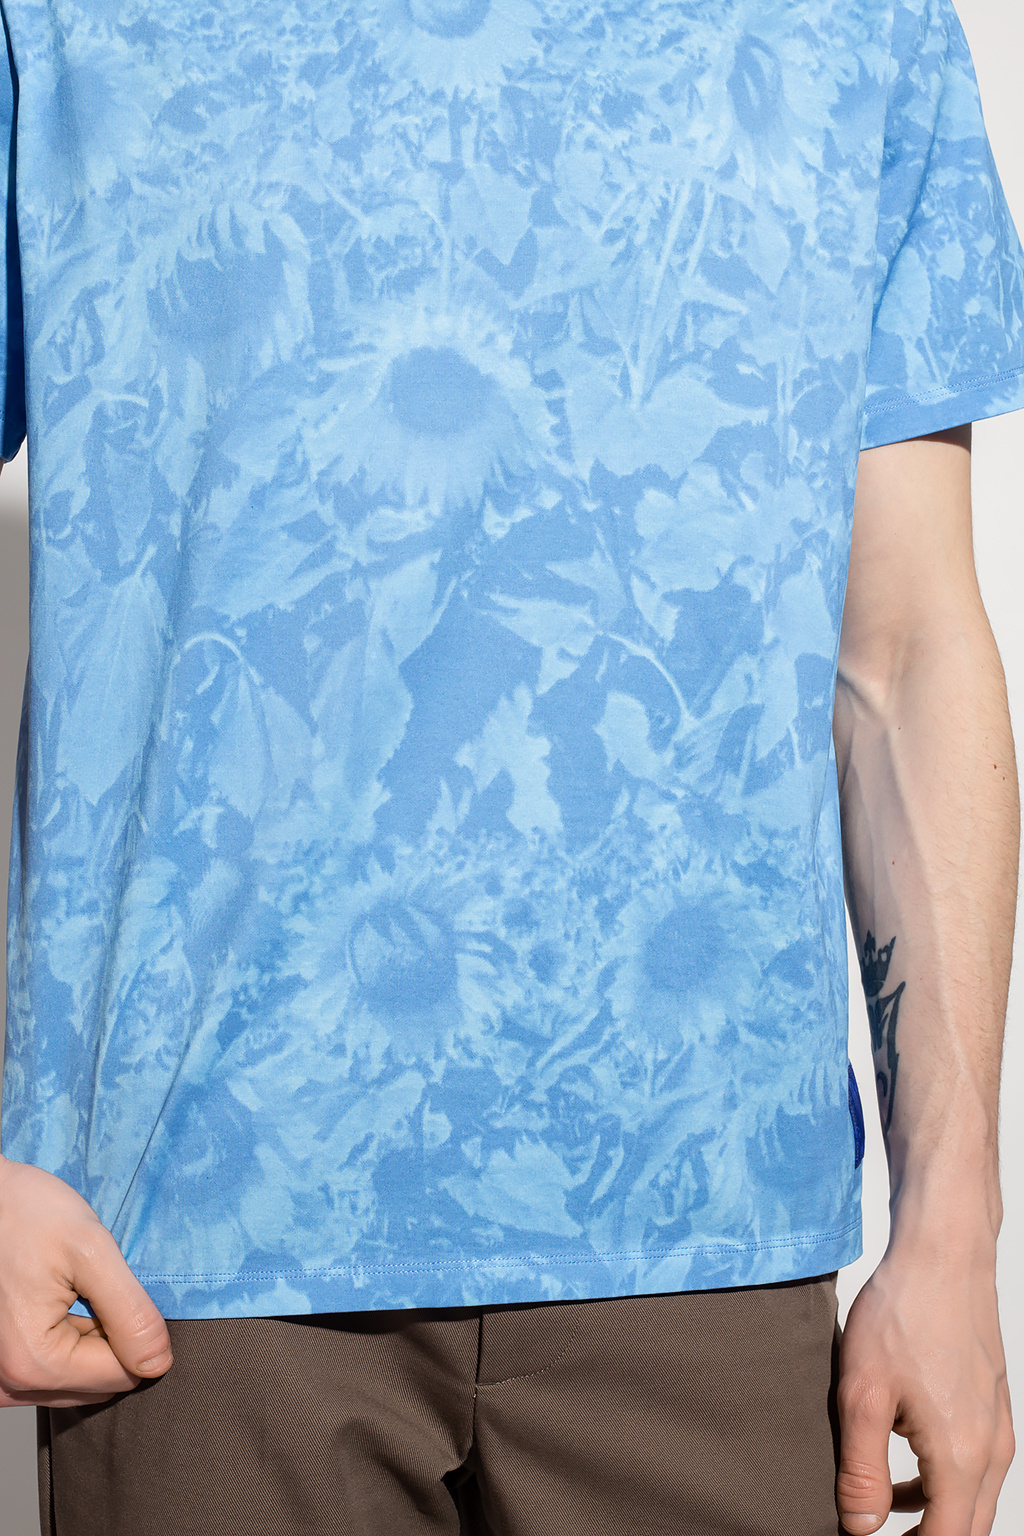 Paul Smith Patterned T-shir